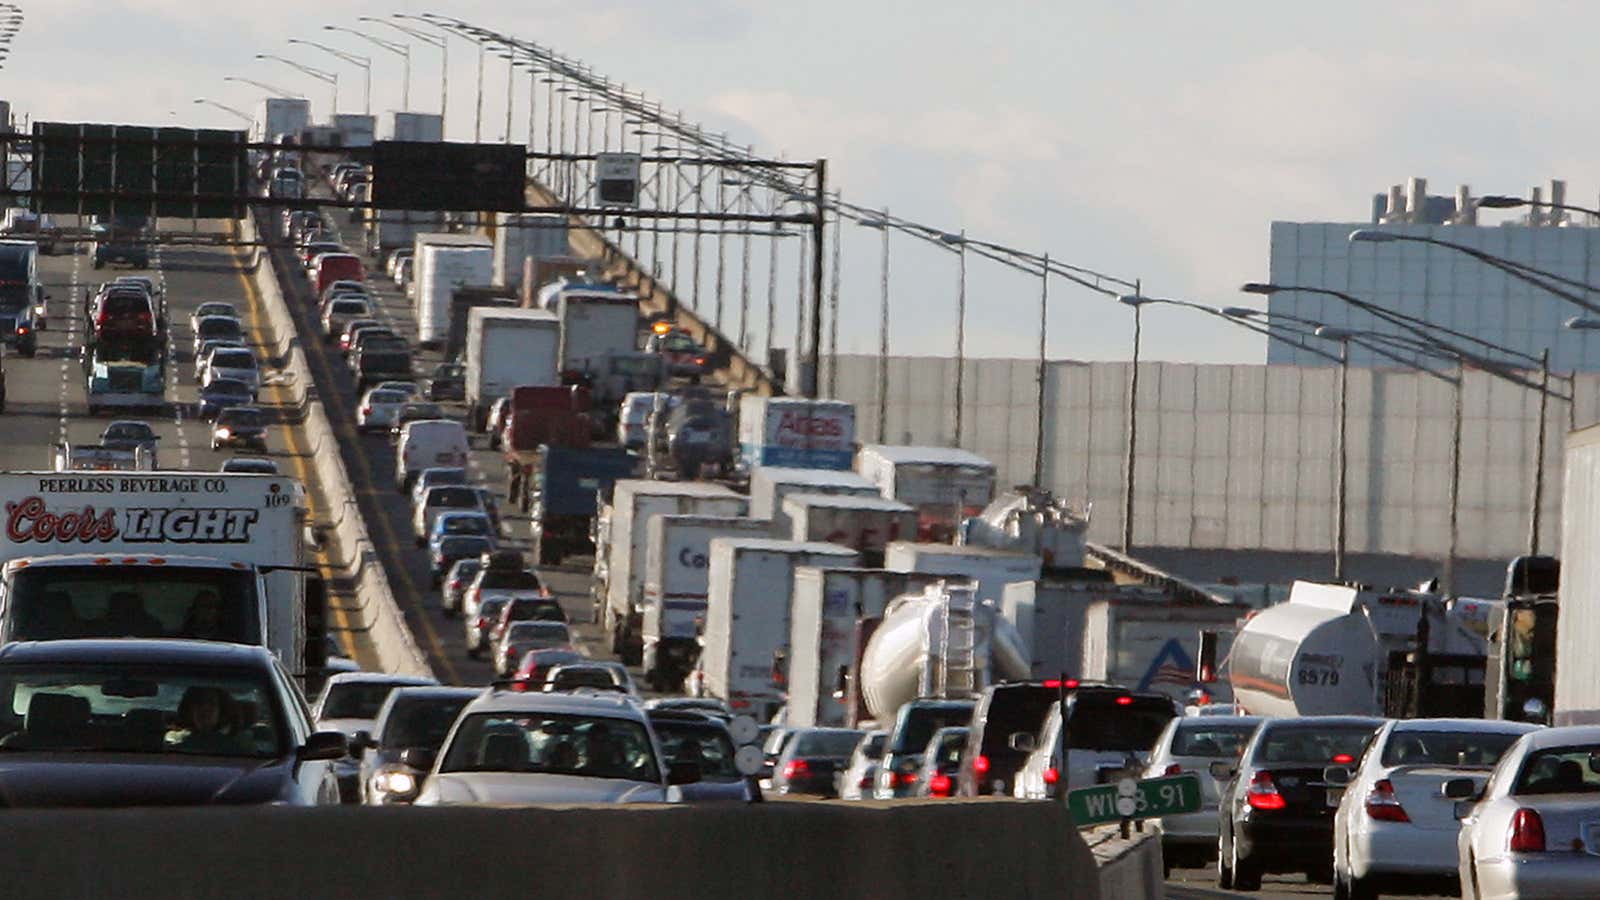 Online shopping is actually making city traffic worse